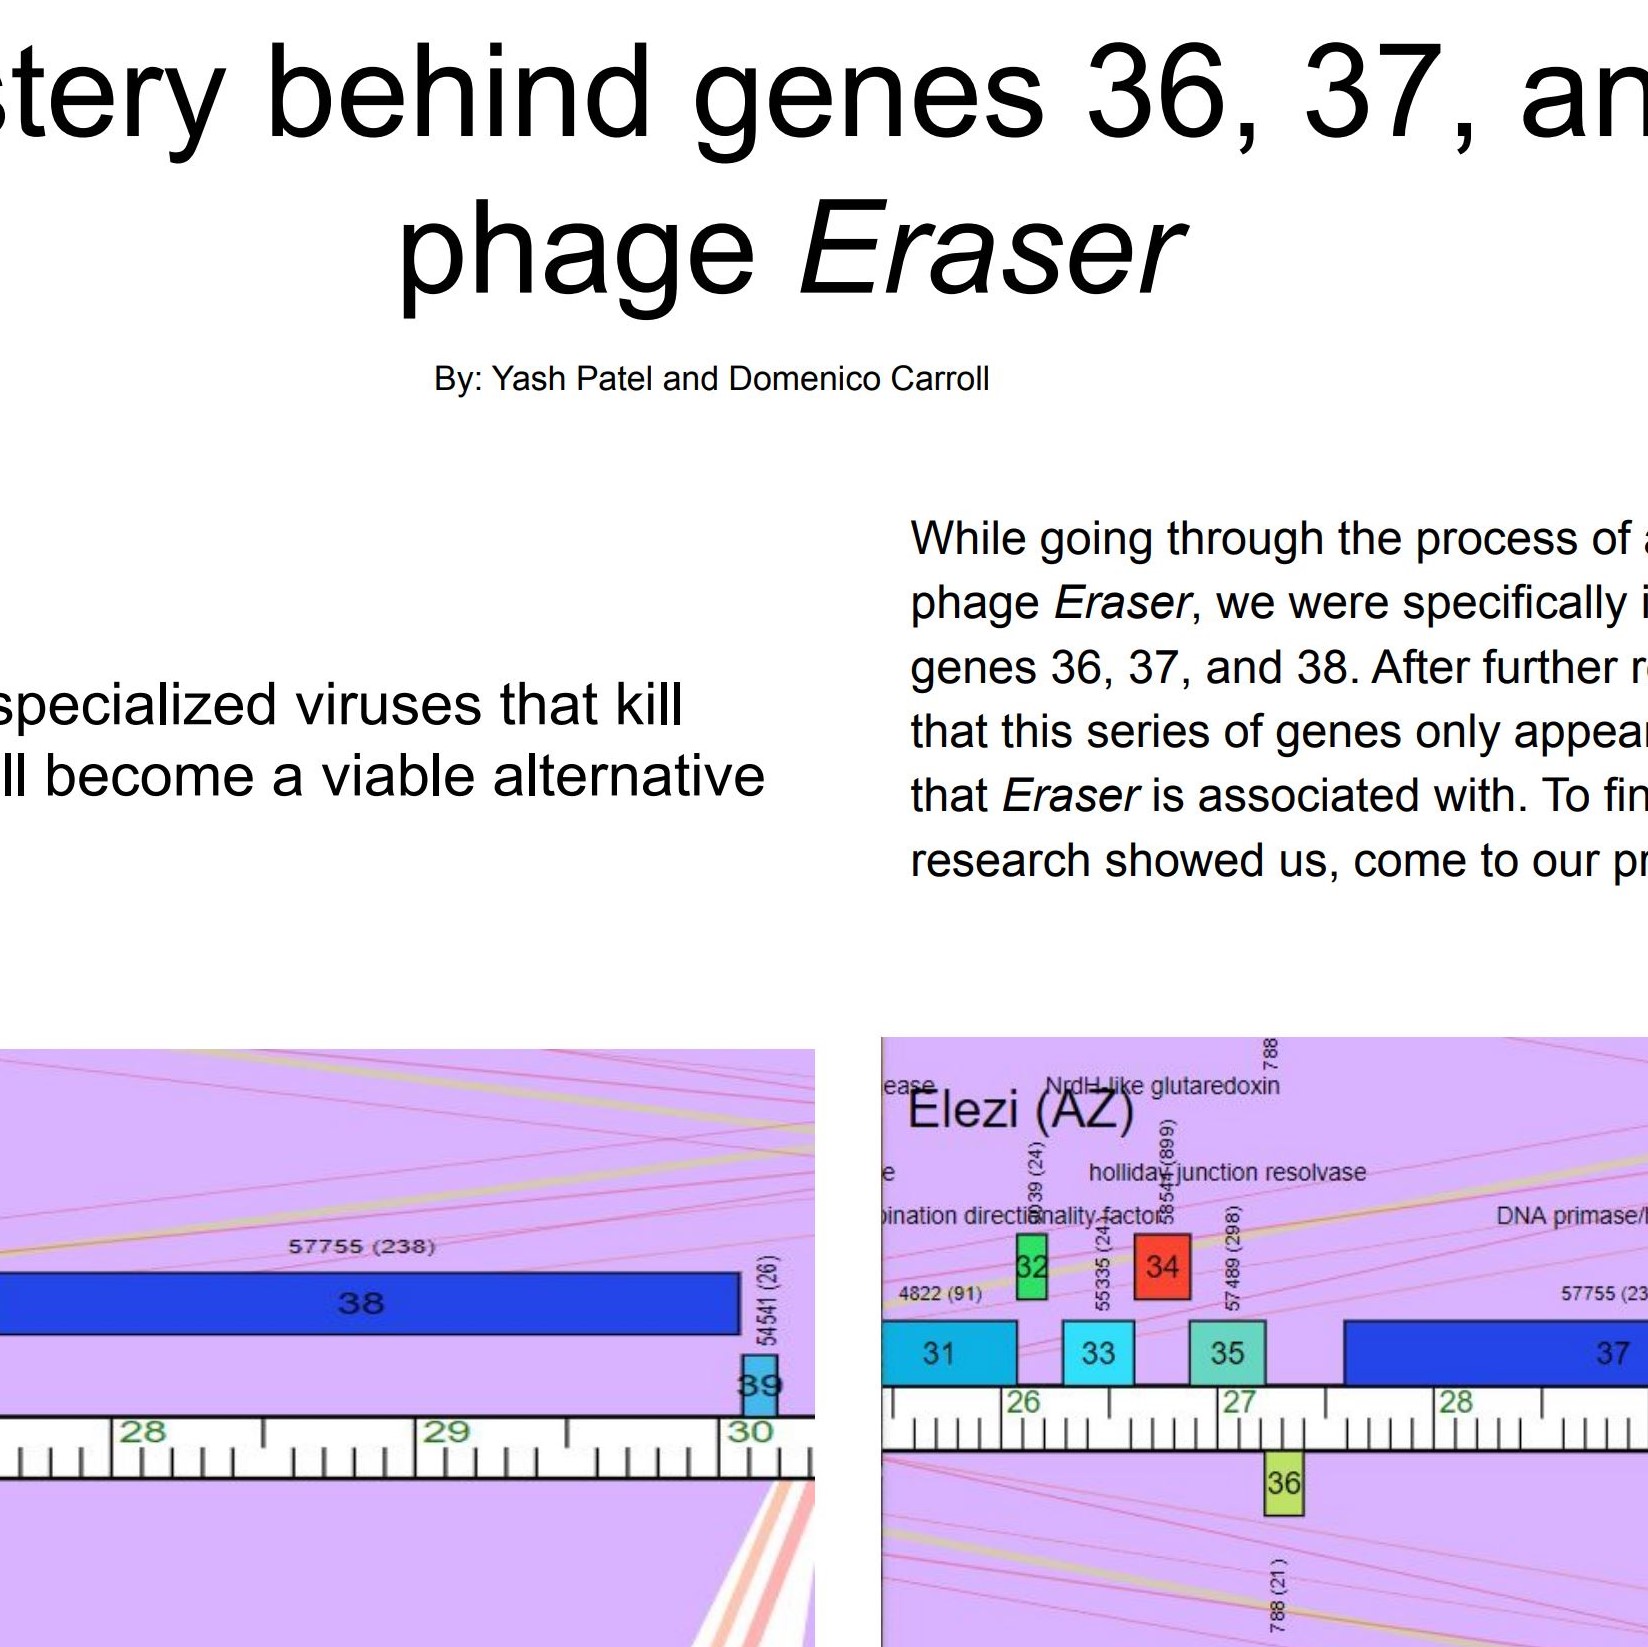 The mystery behind genes 36, 37, and 38 of
	phage Eraser